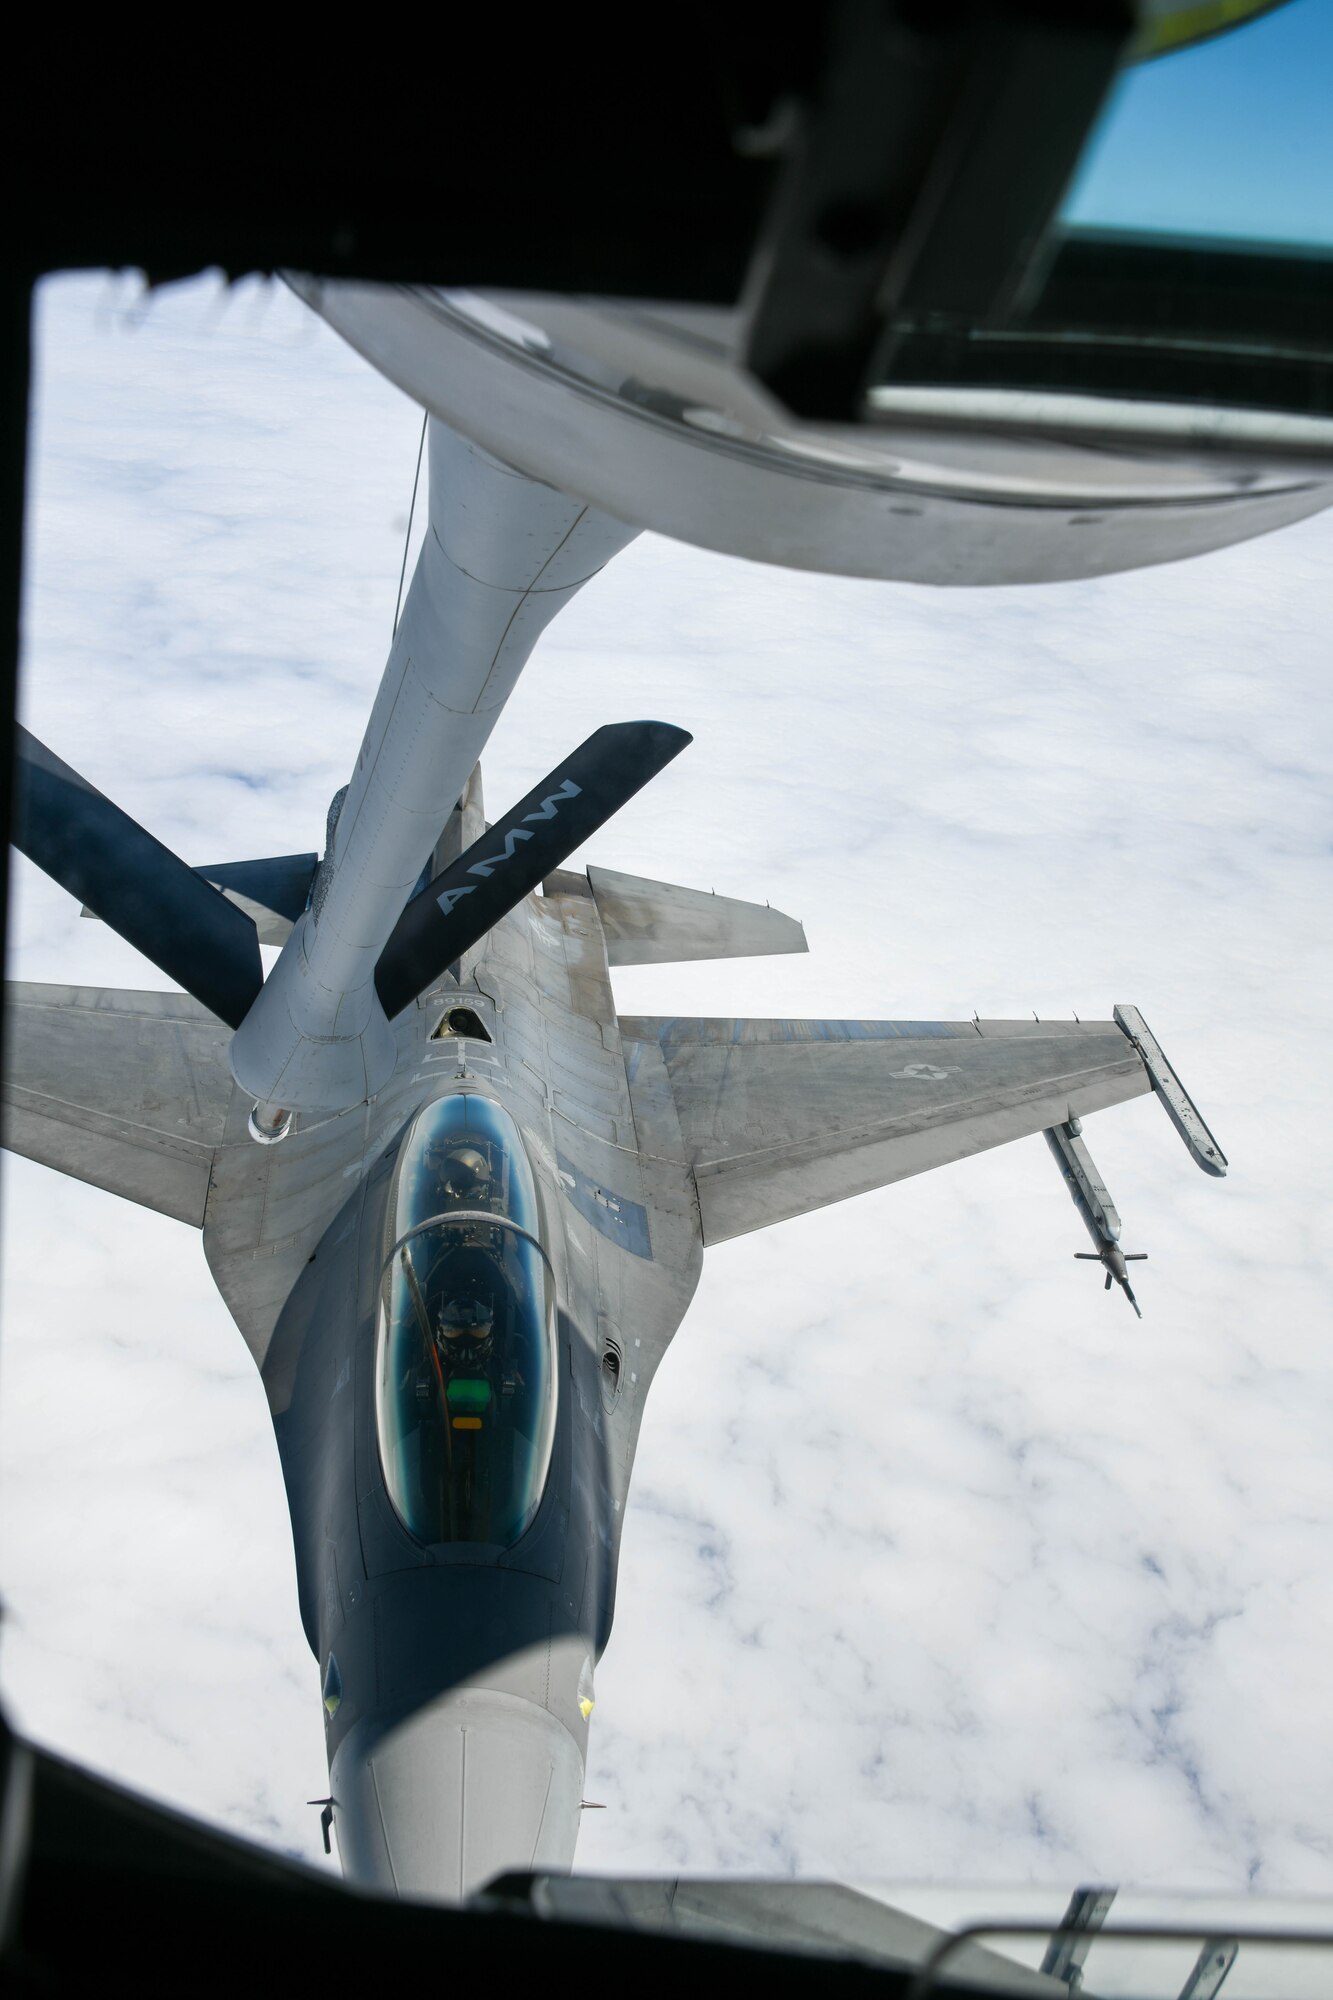 An F-16 Fighting Falcon from the 310th Fighter Squadron at Luke Air Force Base, Arizona, prepares to take fuel from a KC-135 Stratotanker, July 15, 2022. The KC-135 crew made 31 contacts and provided over 39,000 thousand pounds of fuel during their mission. (U.S. Air Force photo by Airman 1st Class Trenton Jancze)